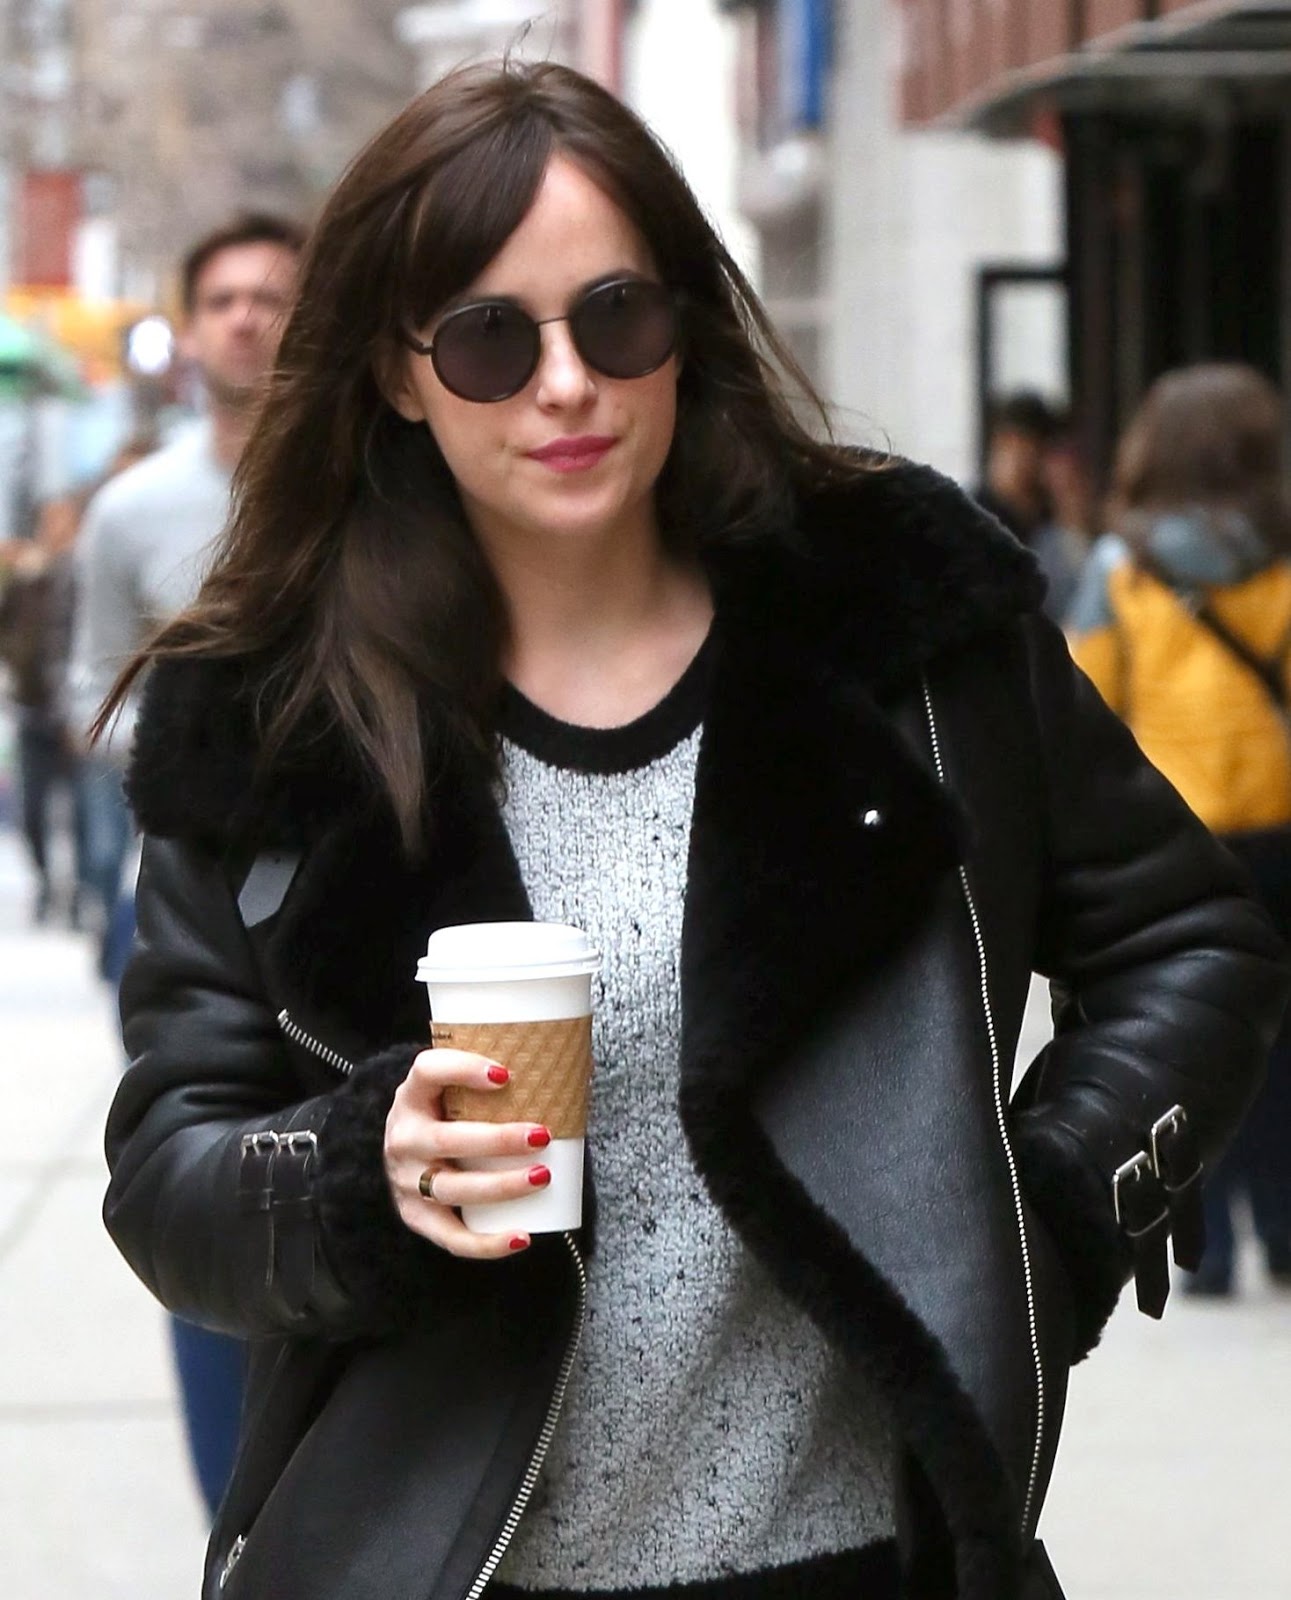 Fifty Shades Updates: HQ PHOTOS: Dakota Johnson out in NYC (April 9, 2015)